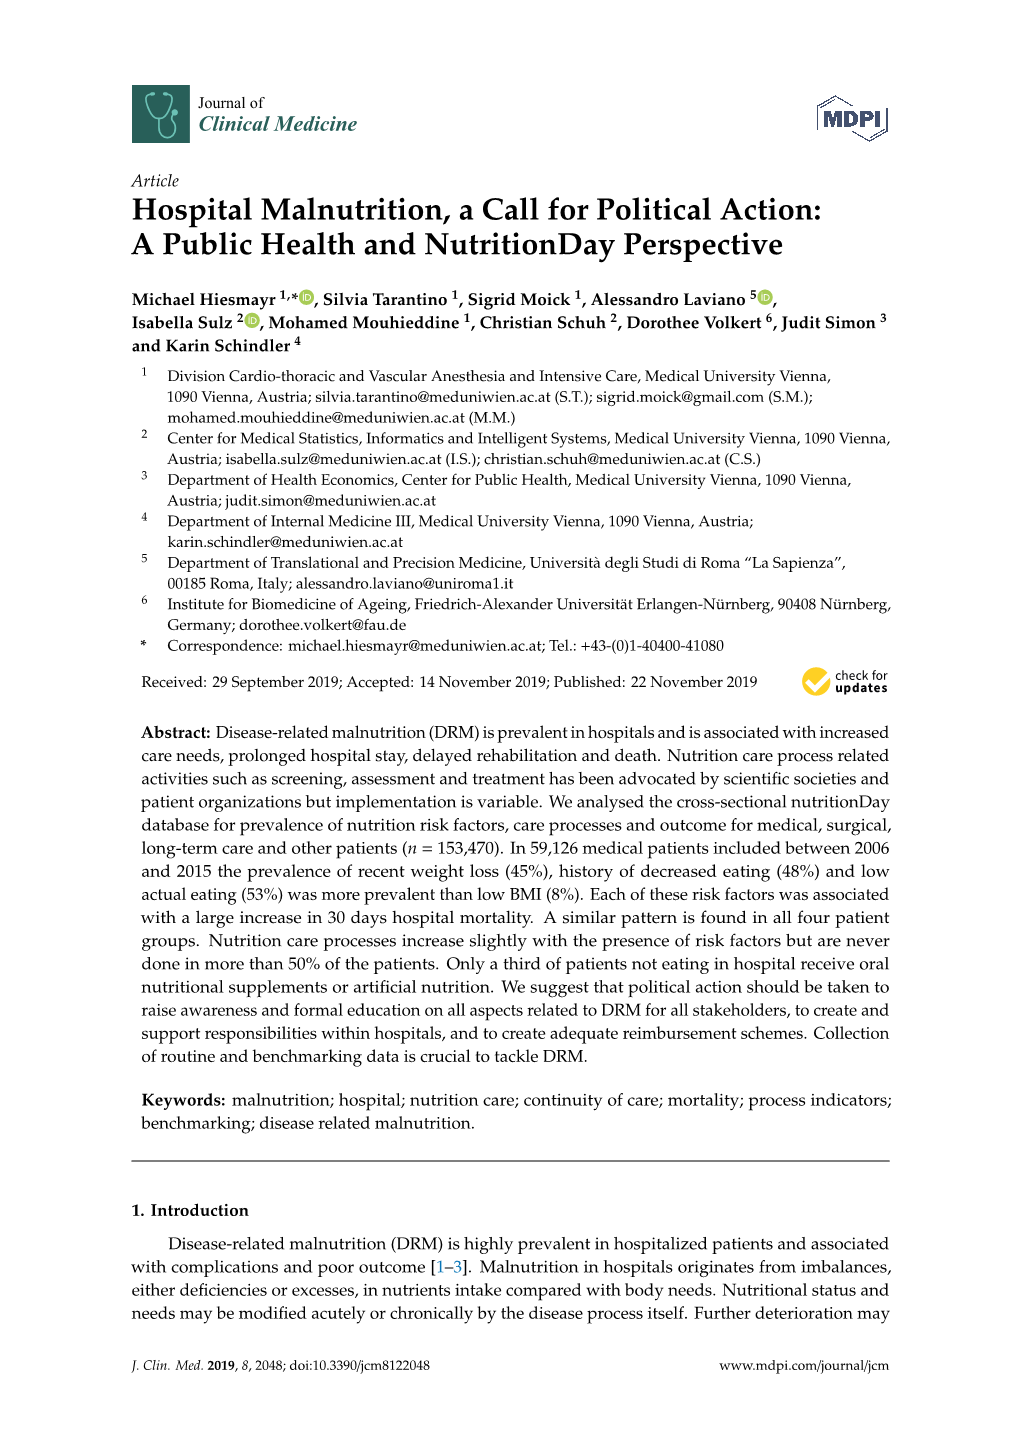 Hospital Malnutrition, a Call for Political Action: a Public Health and Nutritionday Perspective